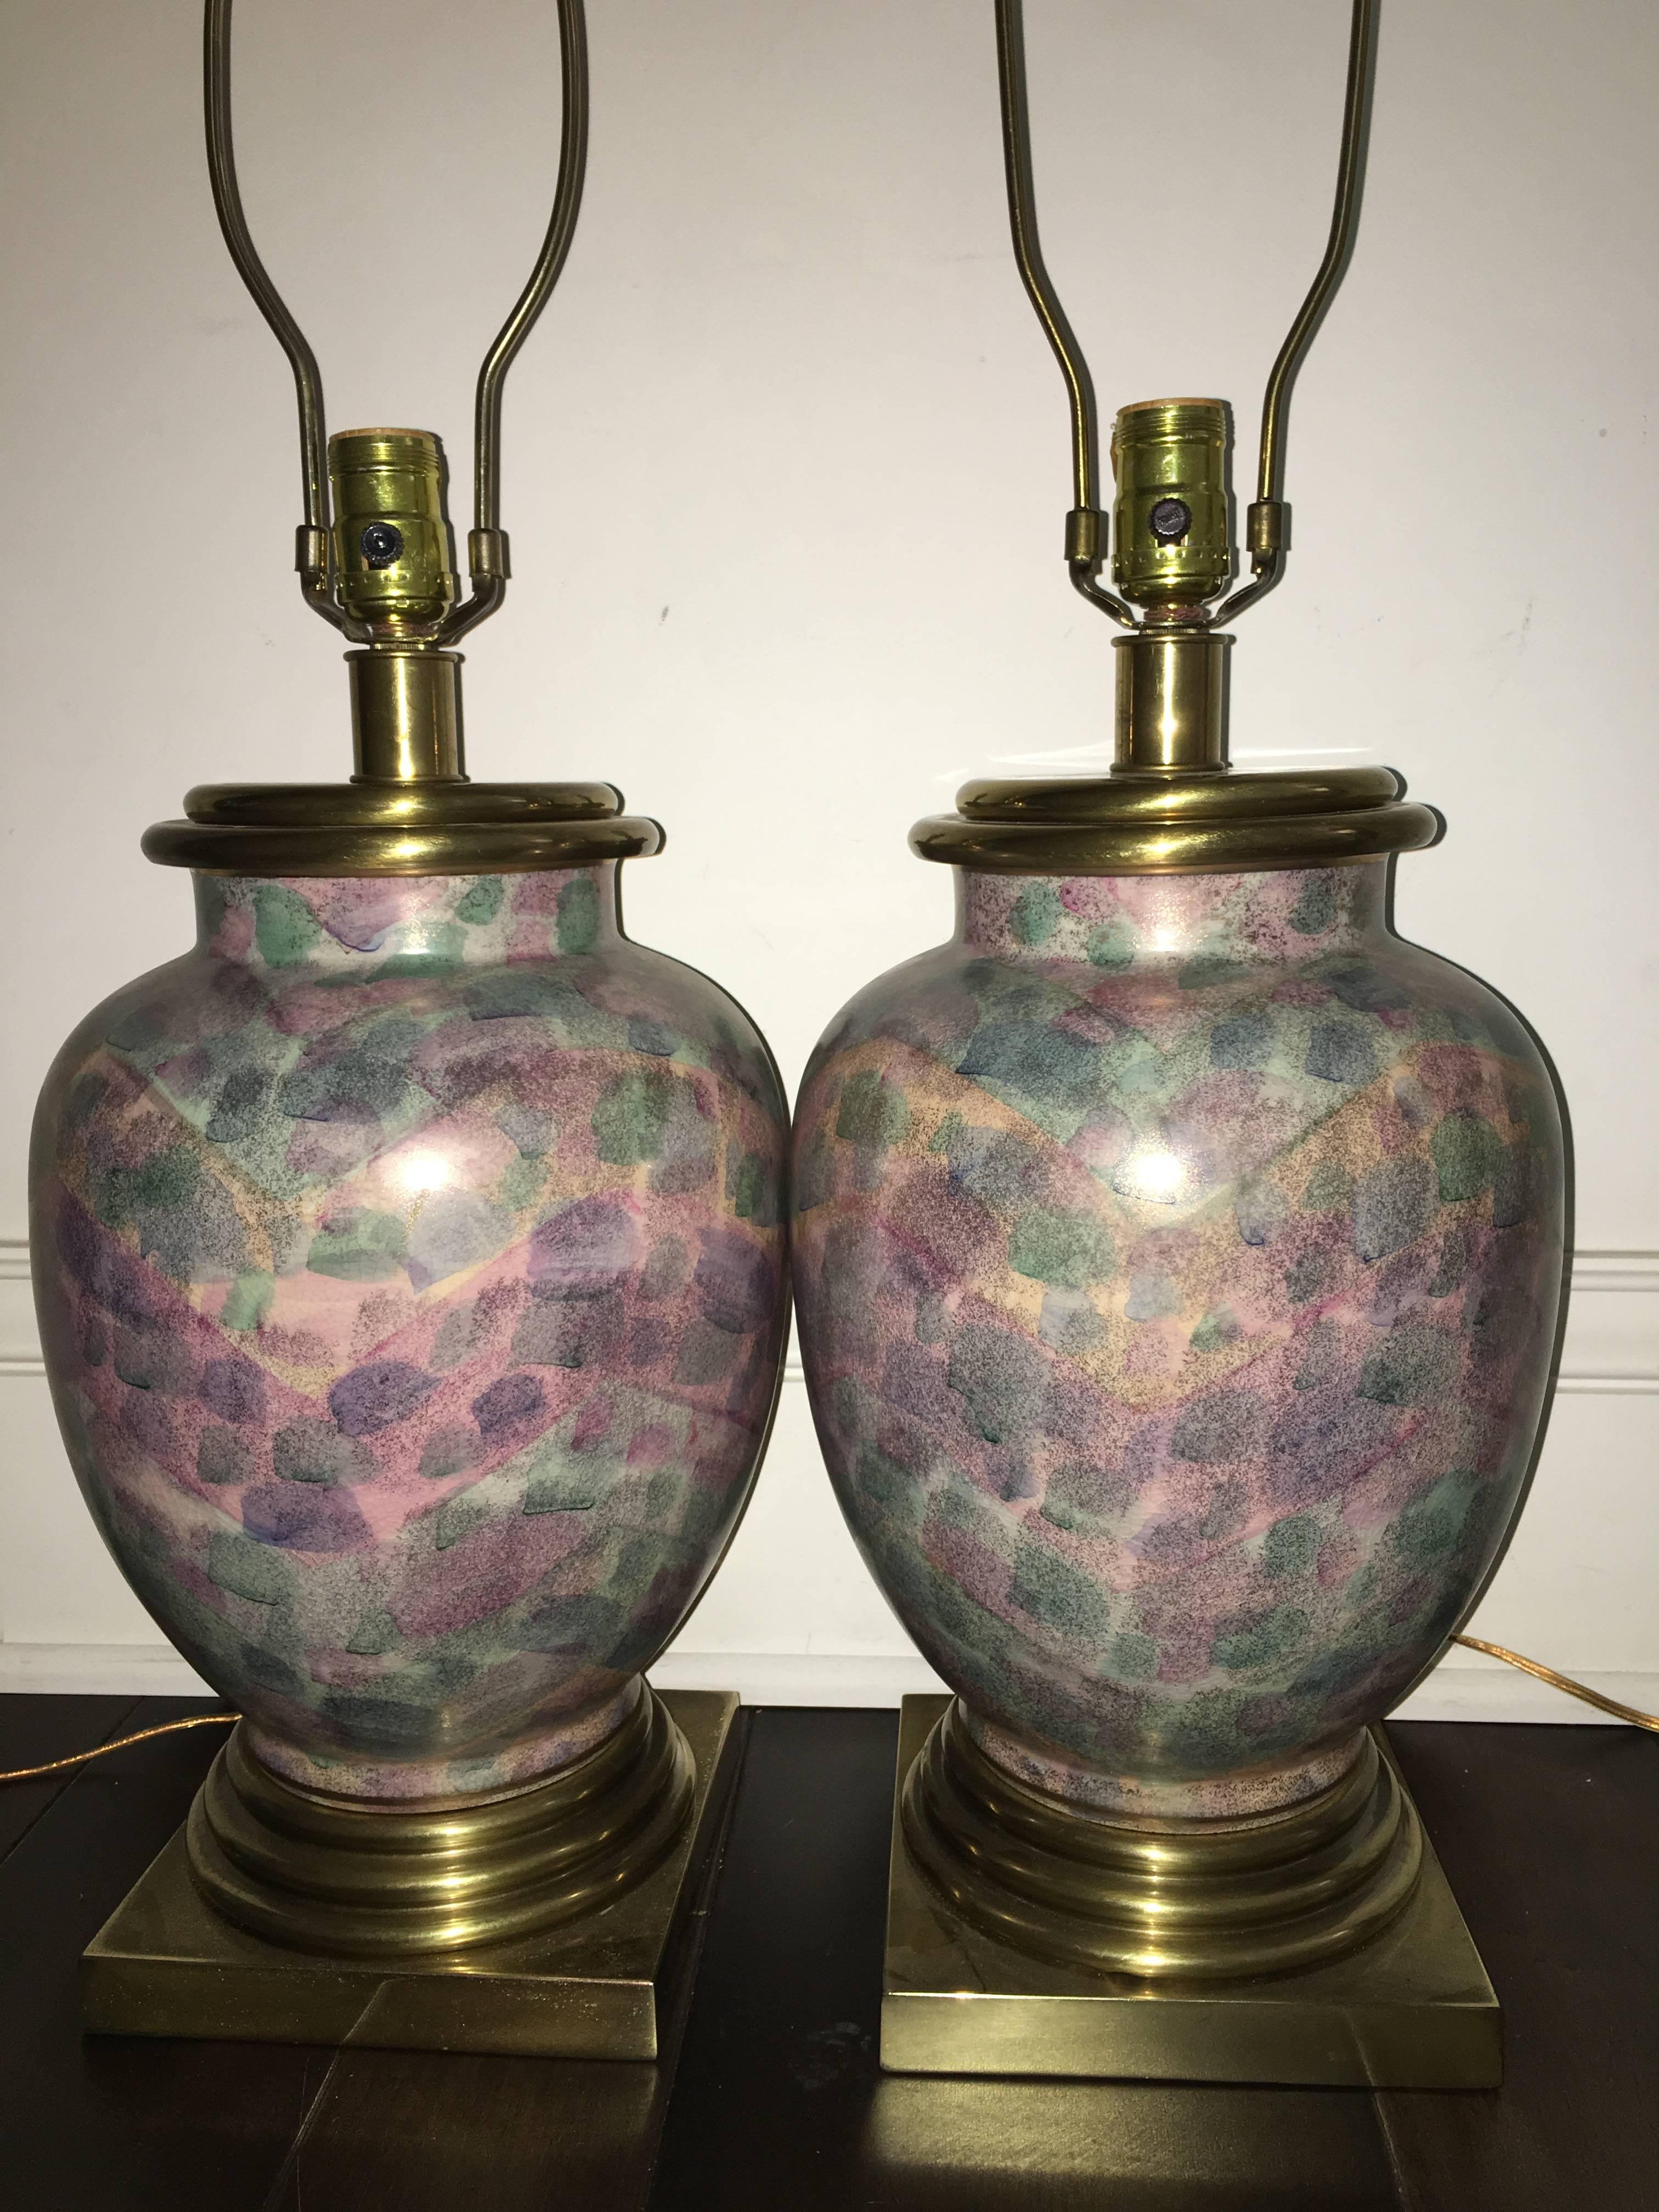 Exceptional pair of multi-colored ceramic table lamps by Frederick Cooper. This unique pair are each comprised of colorful ceramic with brass bases and finials. Lamps are rewired and ready to use. Truly a beautiful pair in person.